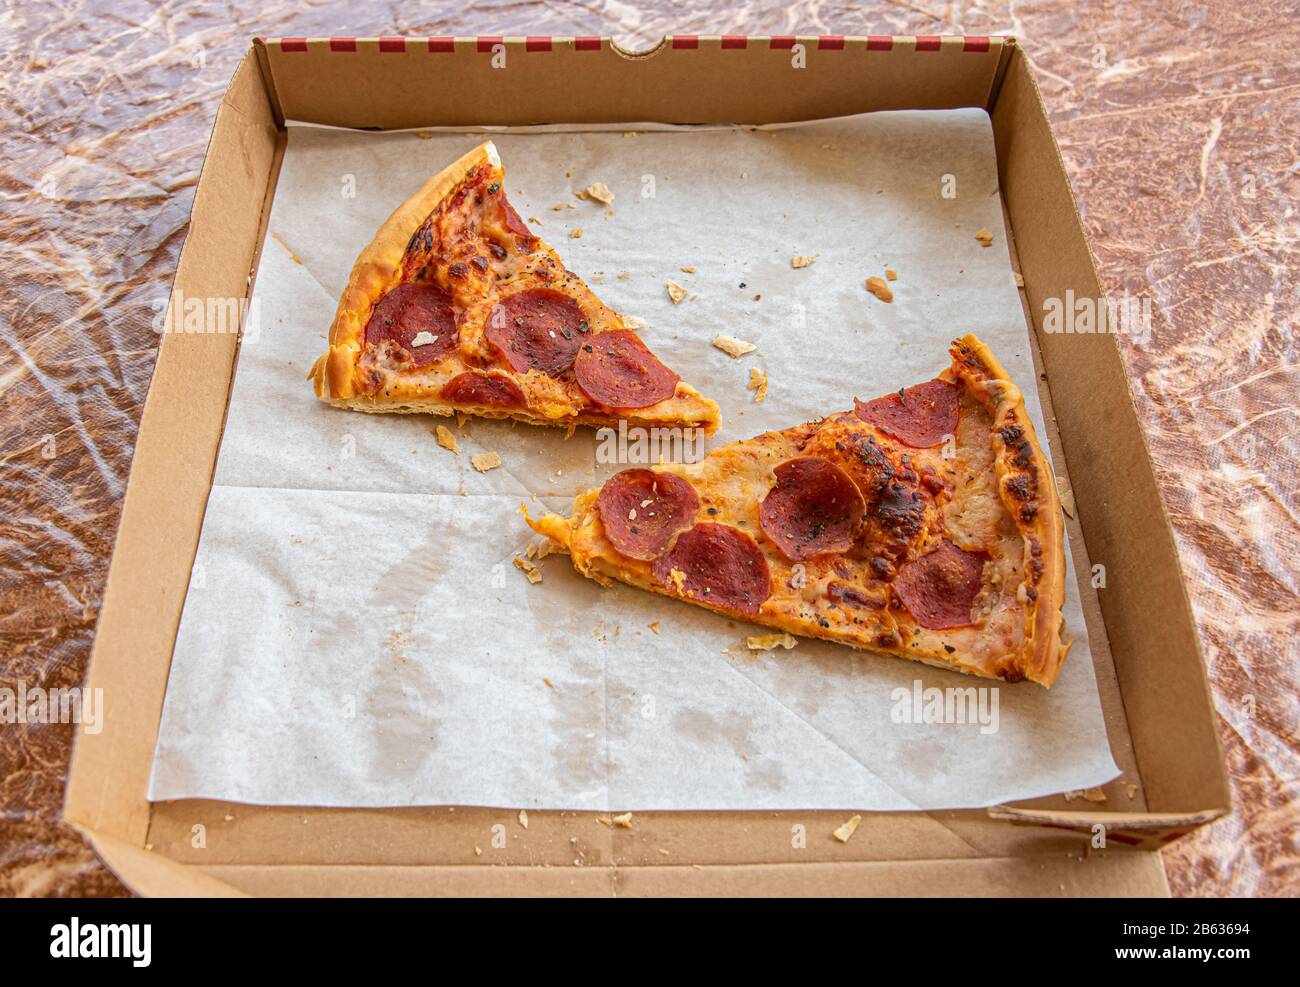 https://c8.alamy.com/comp/2B63694/stale-leftover-pizza-slices-in-pizza-delivery-box-2B63694.jpg